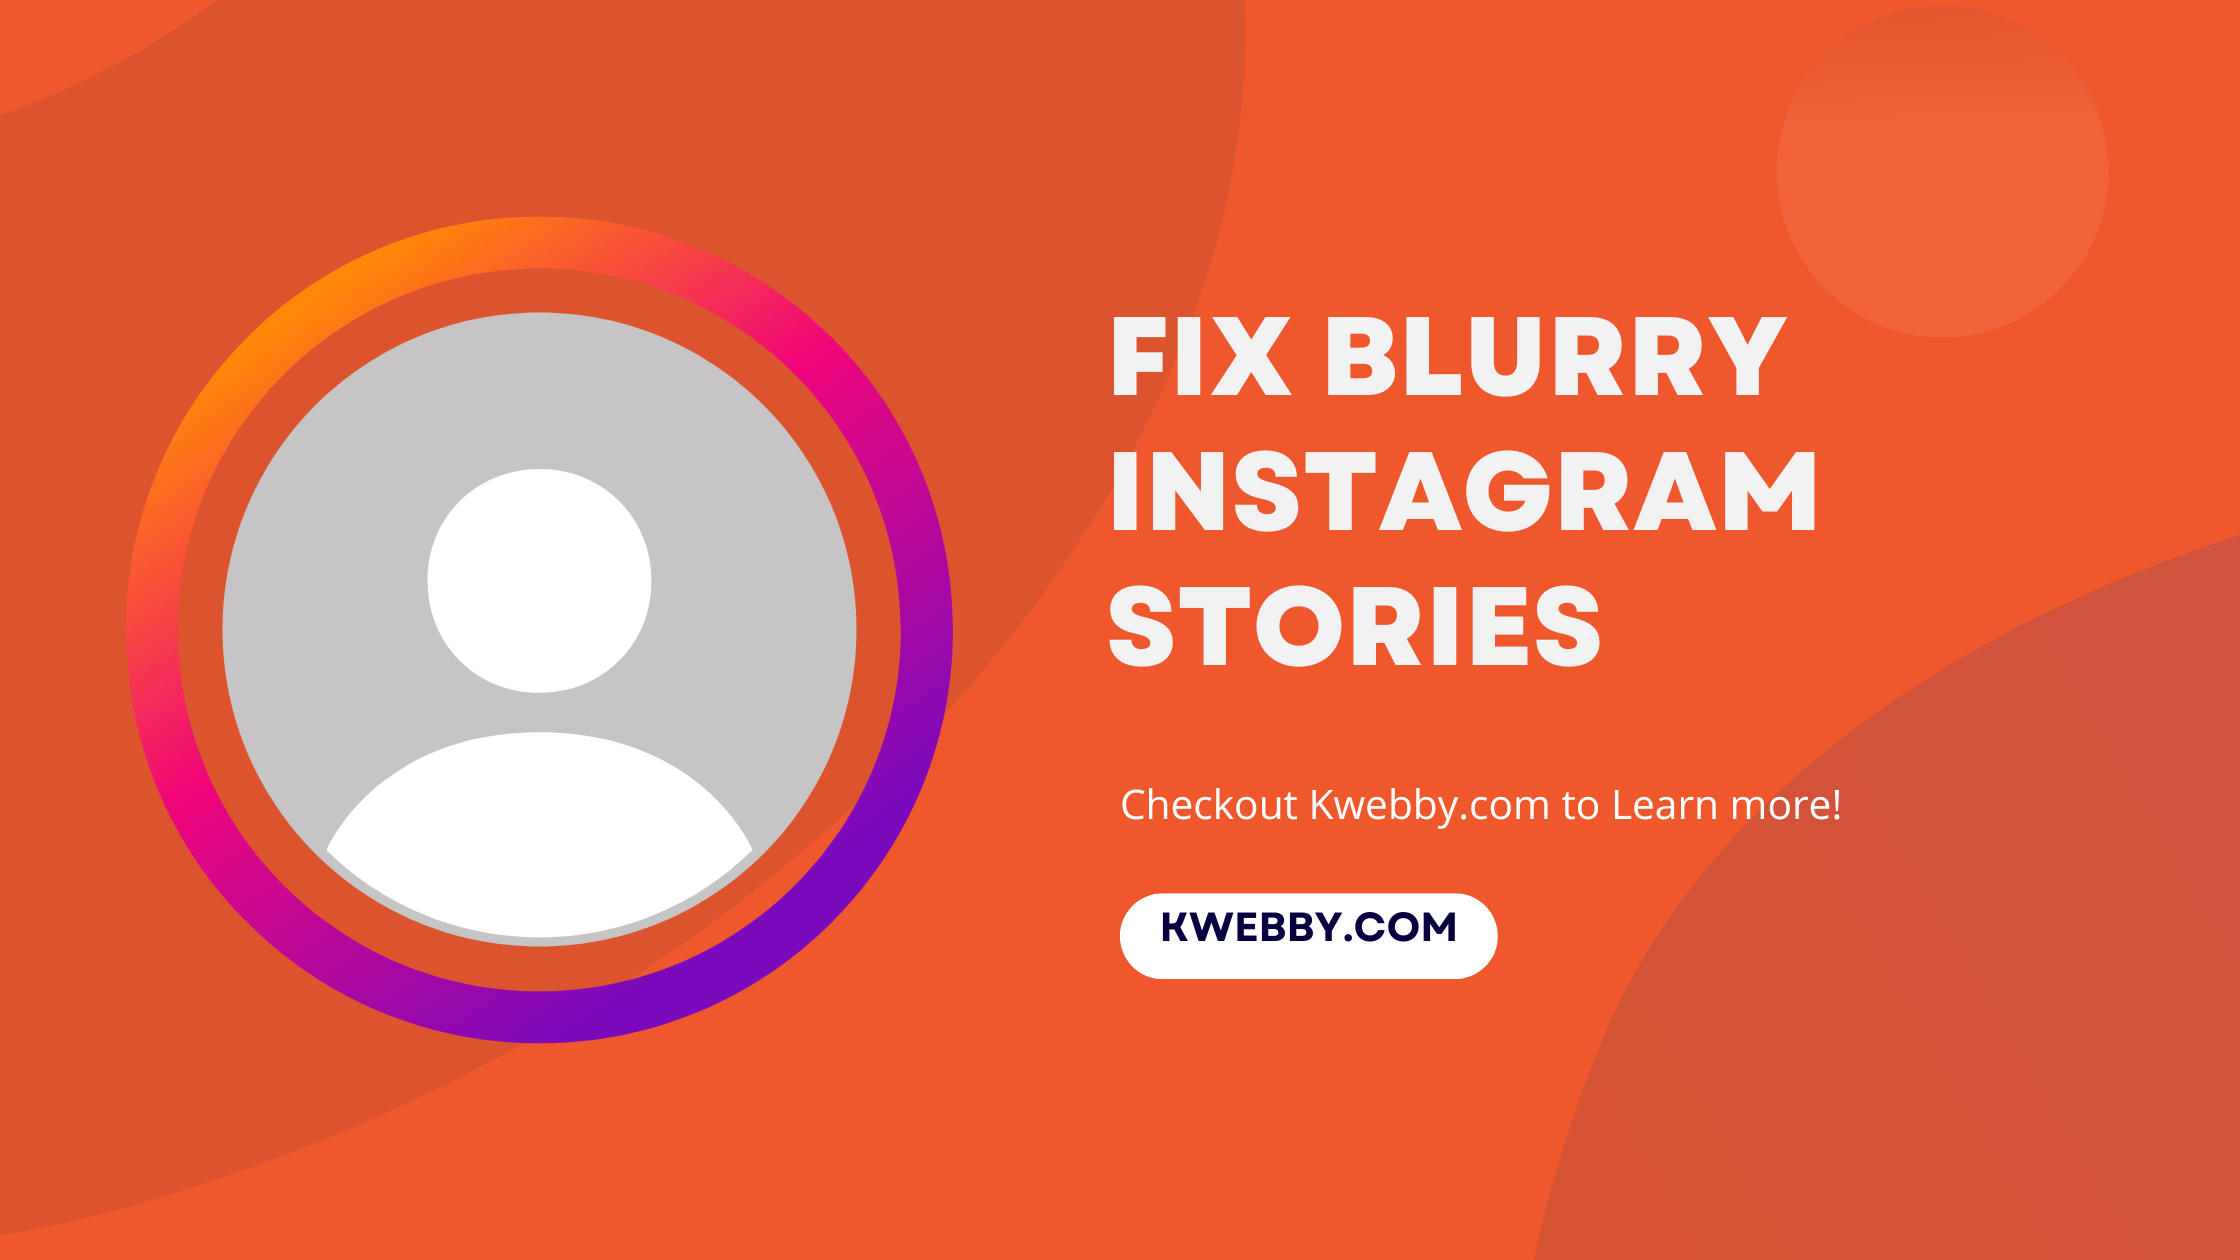 How to Fix Blurry Instagram Stories